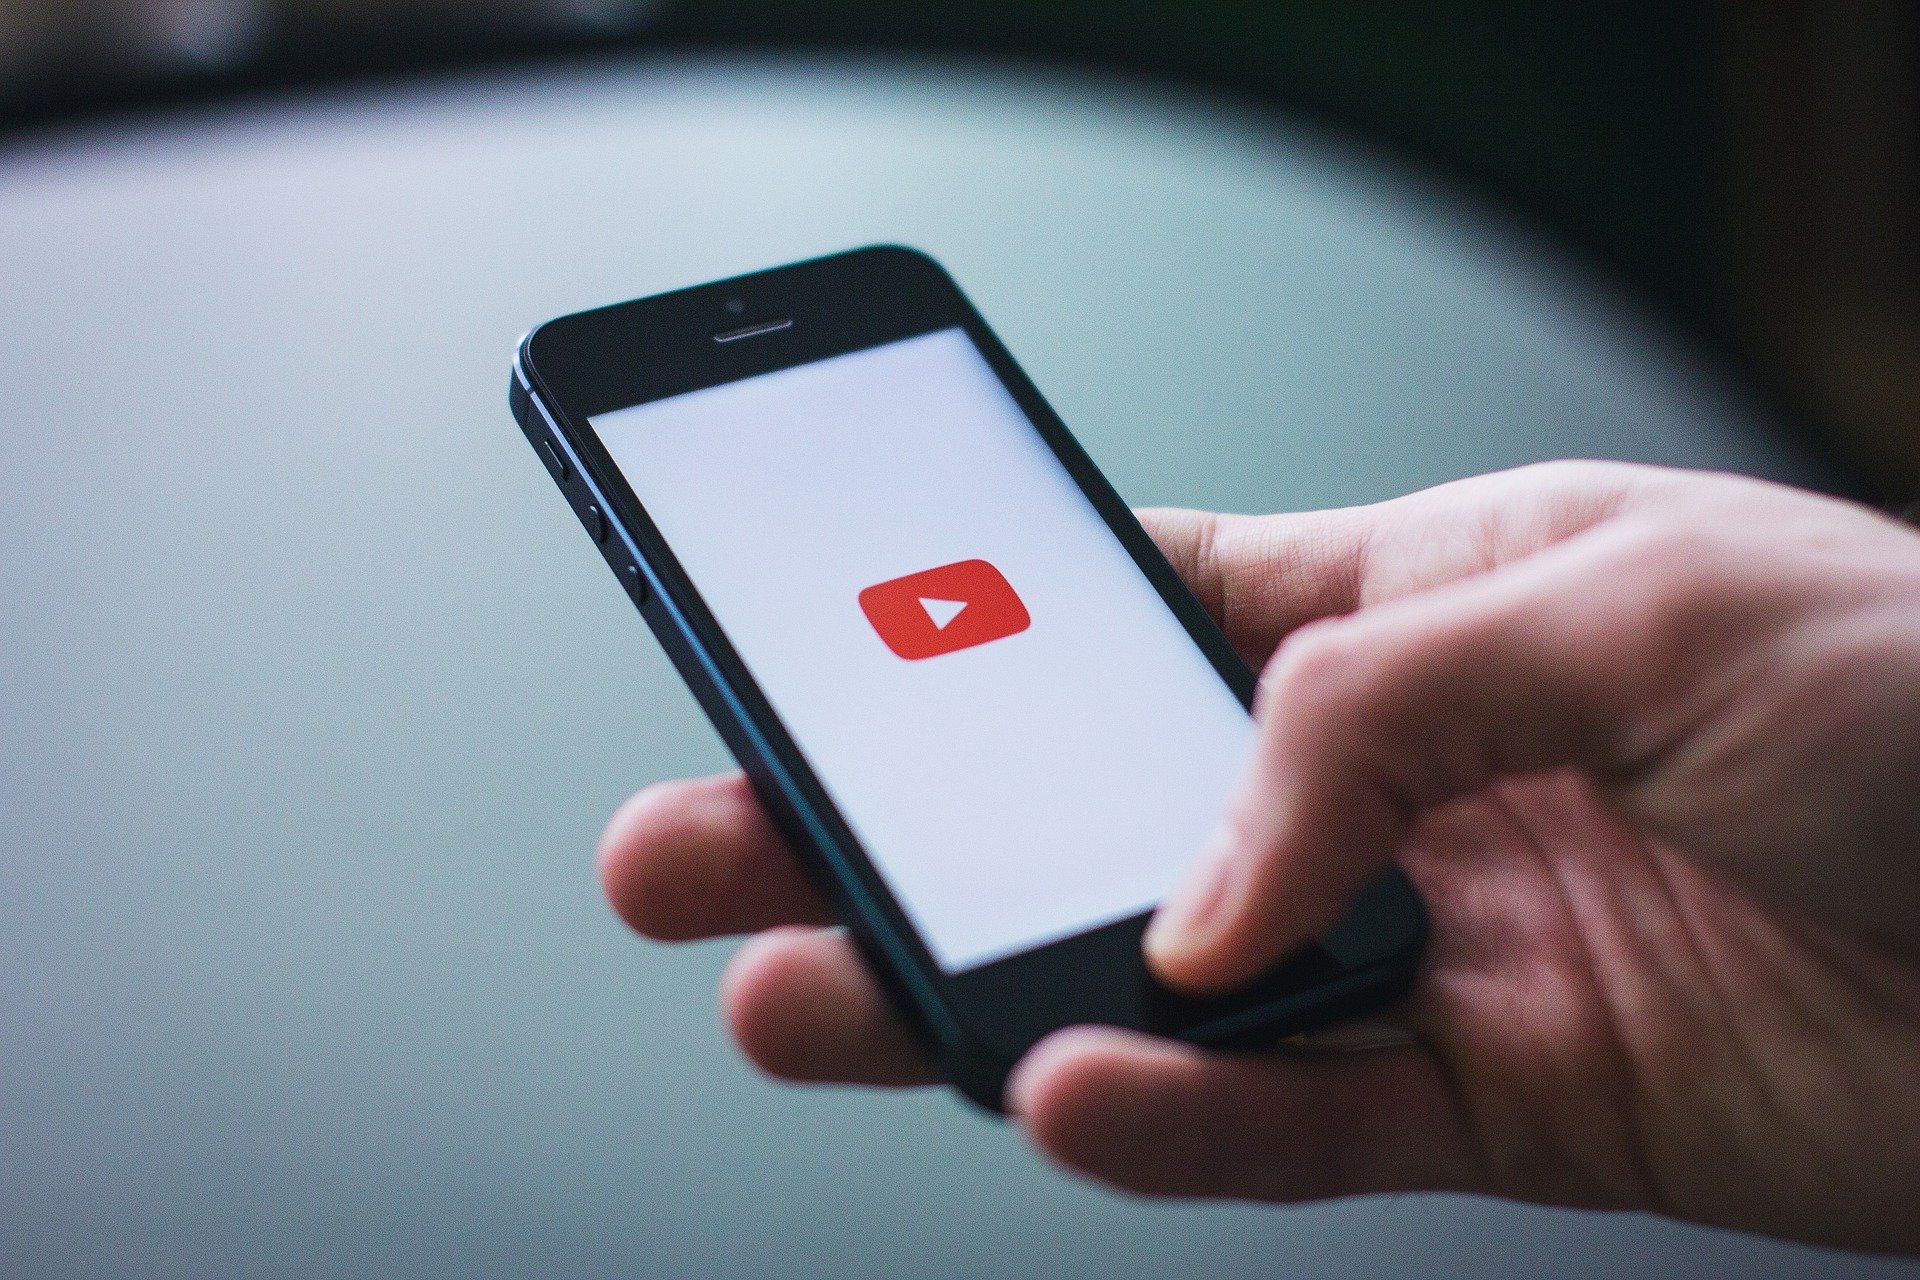 YouTube back up after massive outage affecting 286,000 users